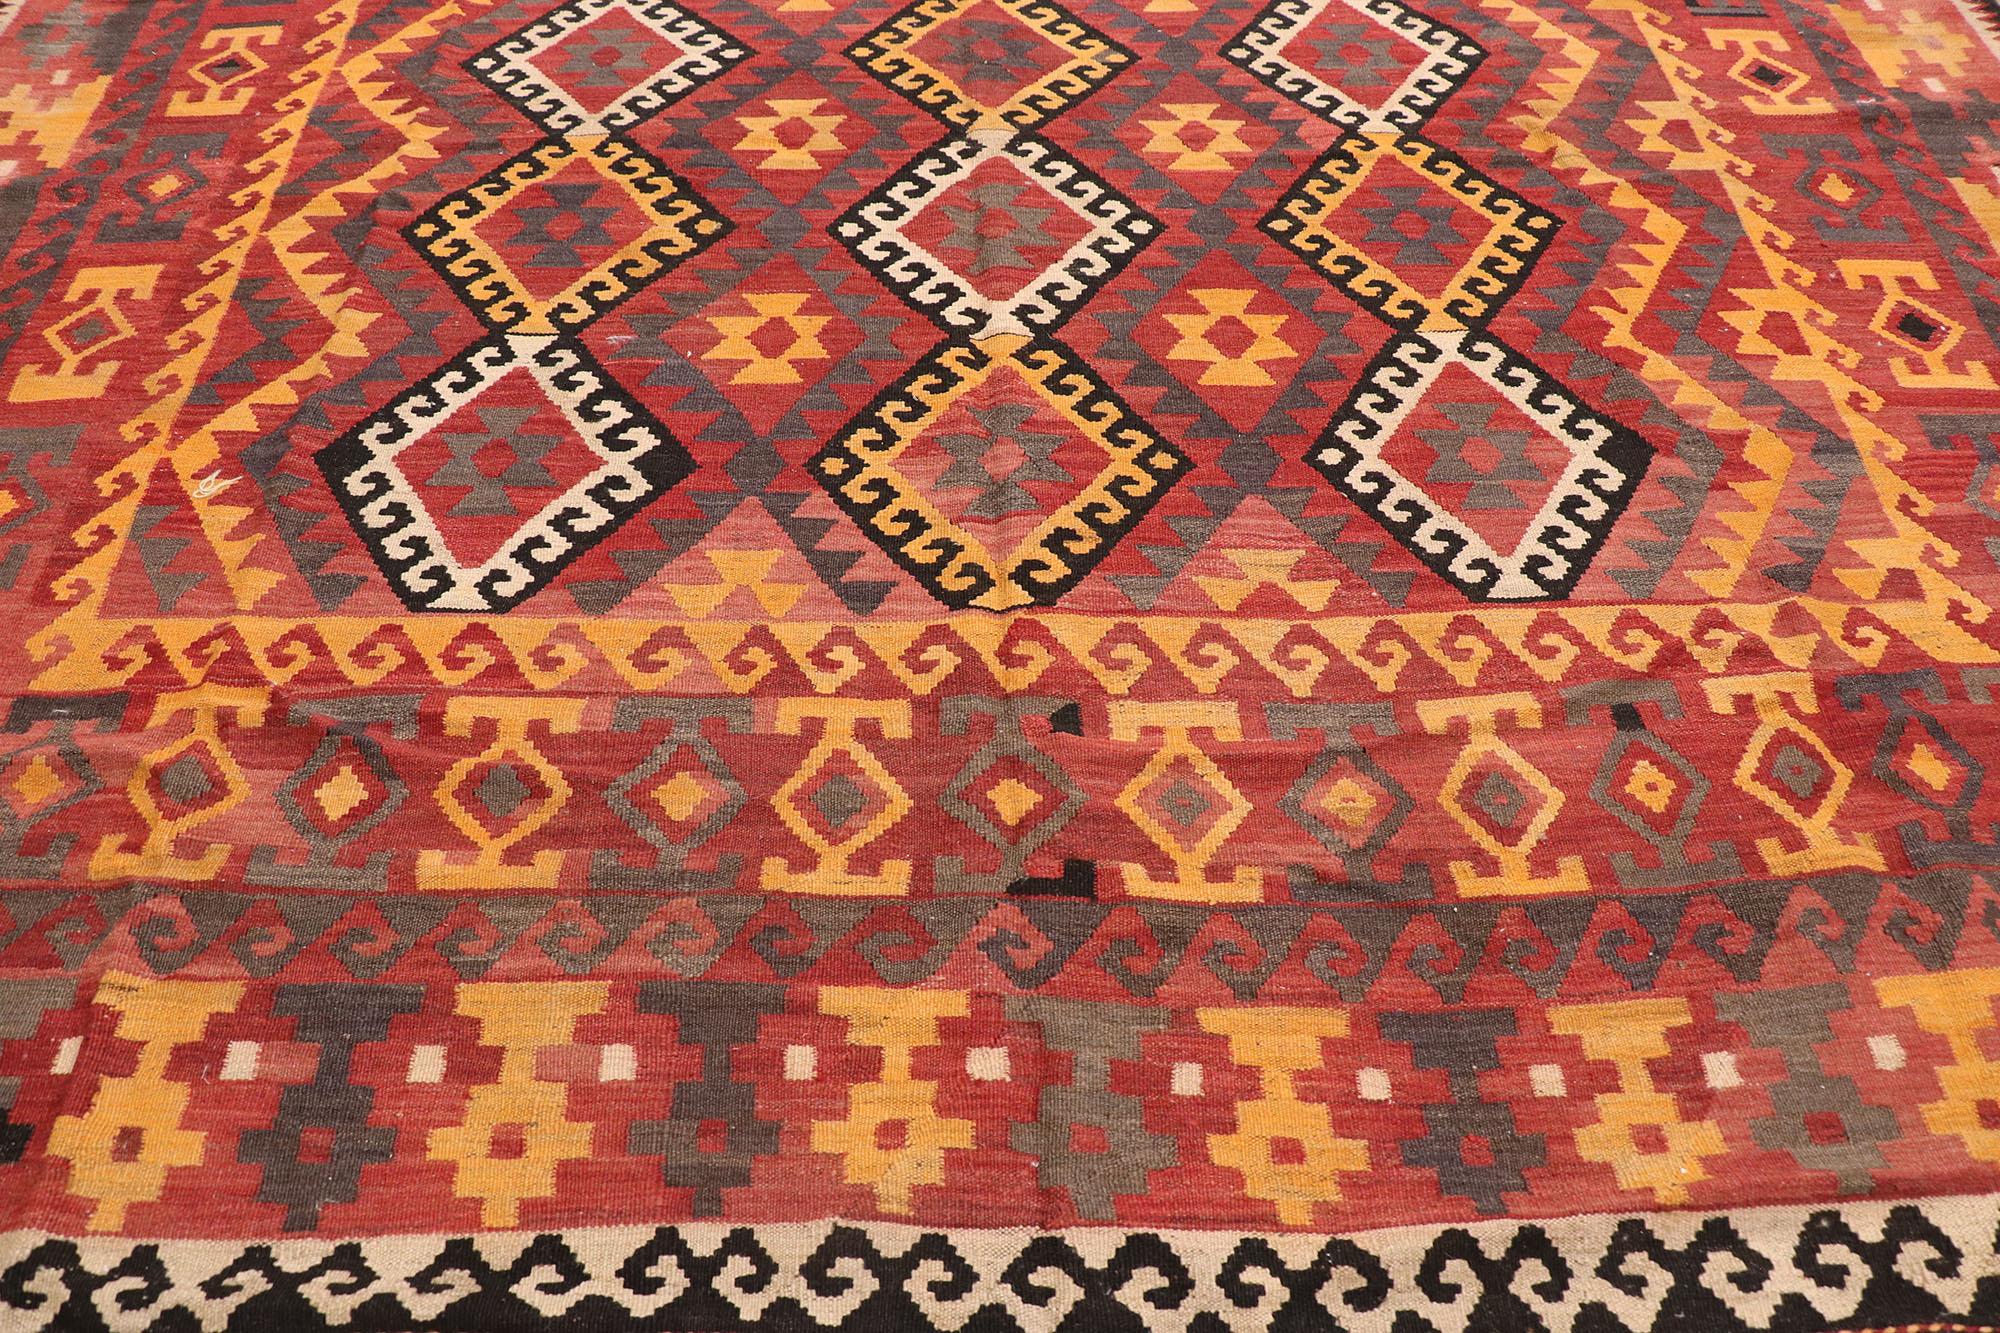 Vintage Afghan Maimana Kilim Rug, Tribal Enchantment Meets Southwest Style In Good Condition For Sale In Dallas, TX